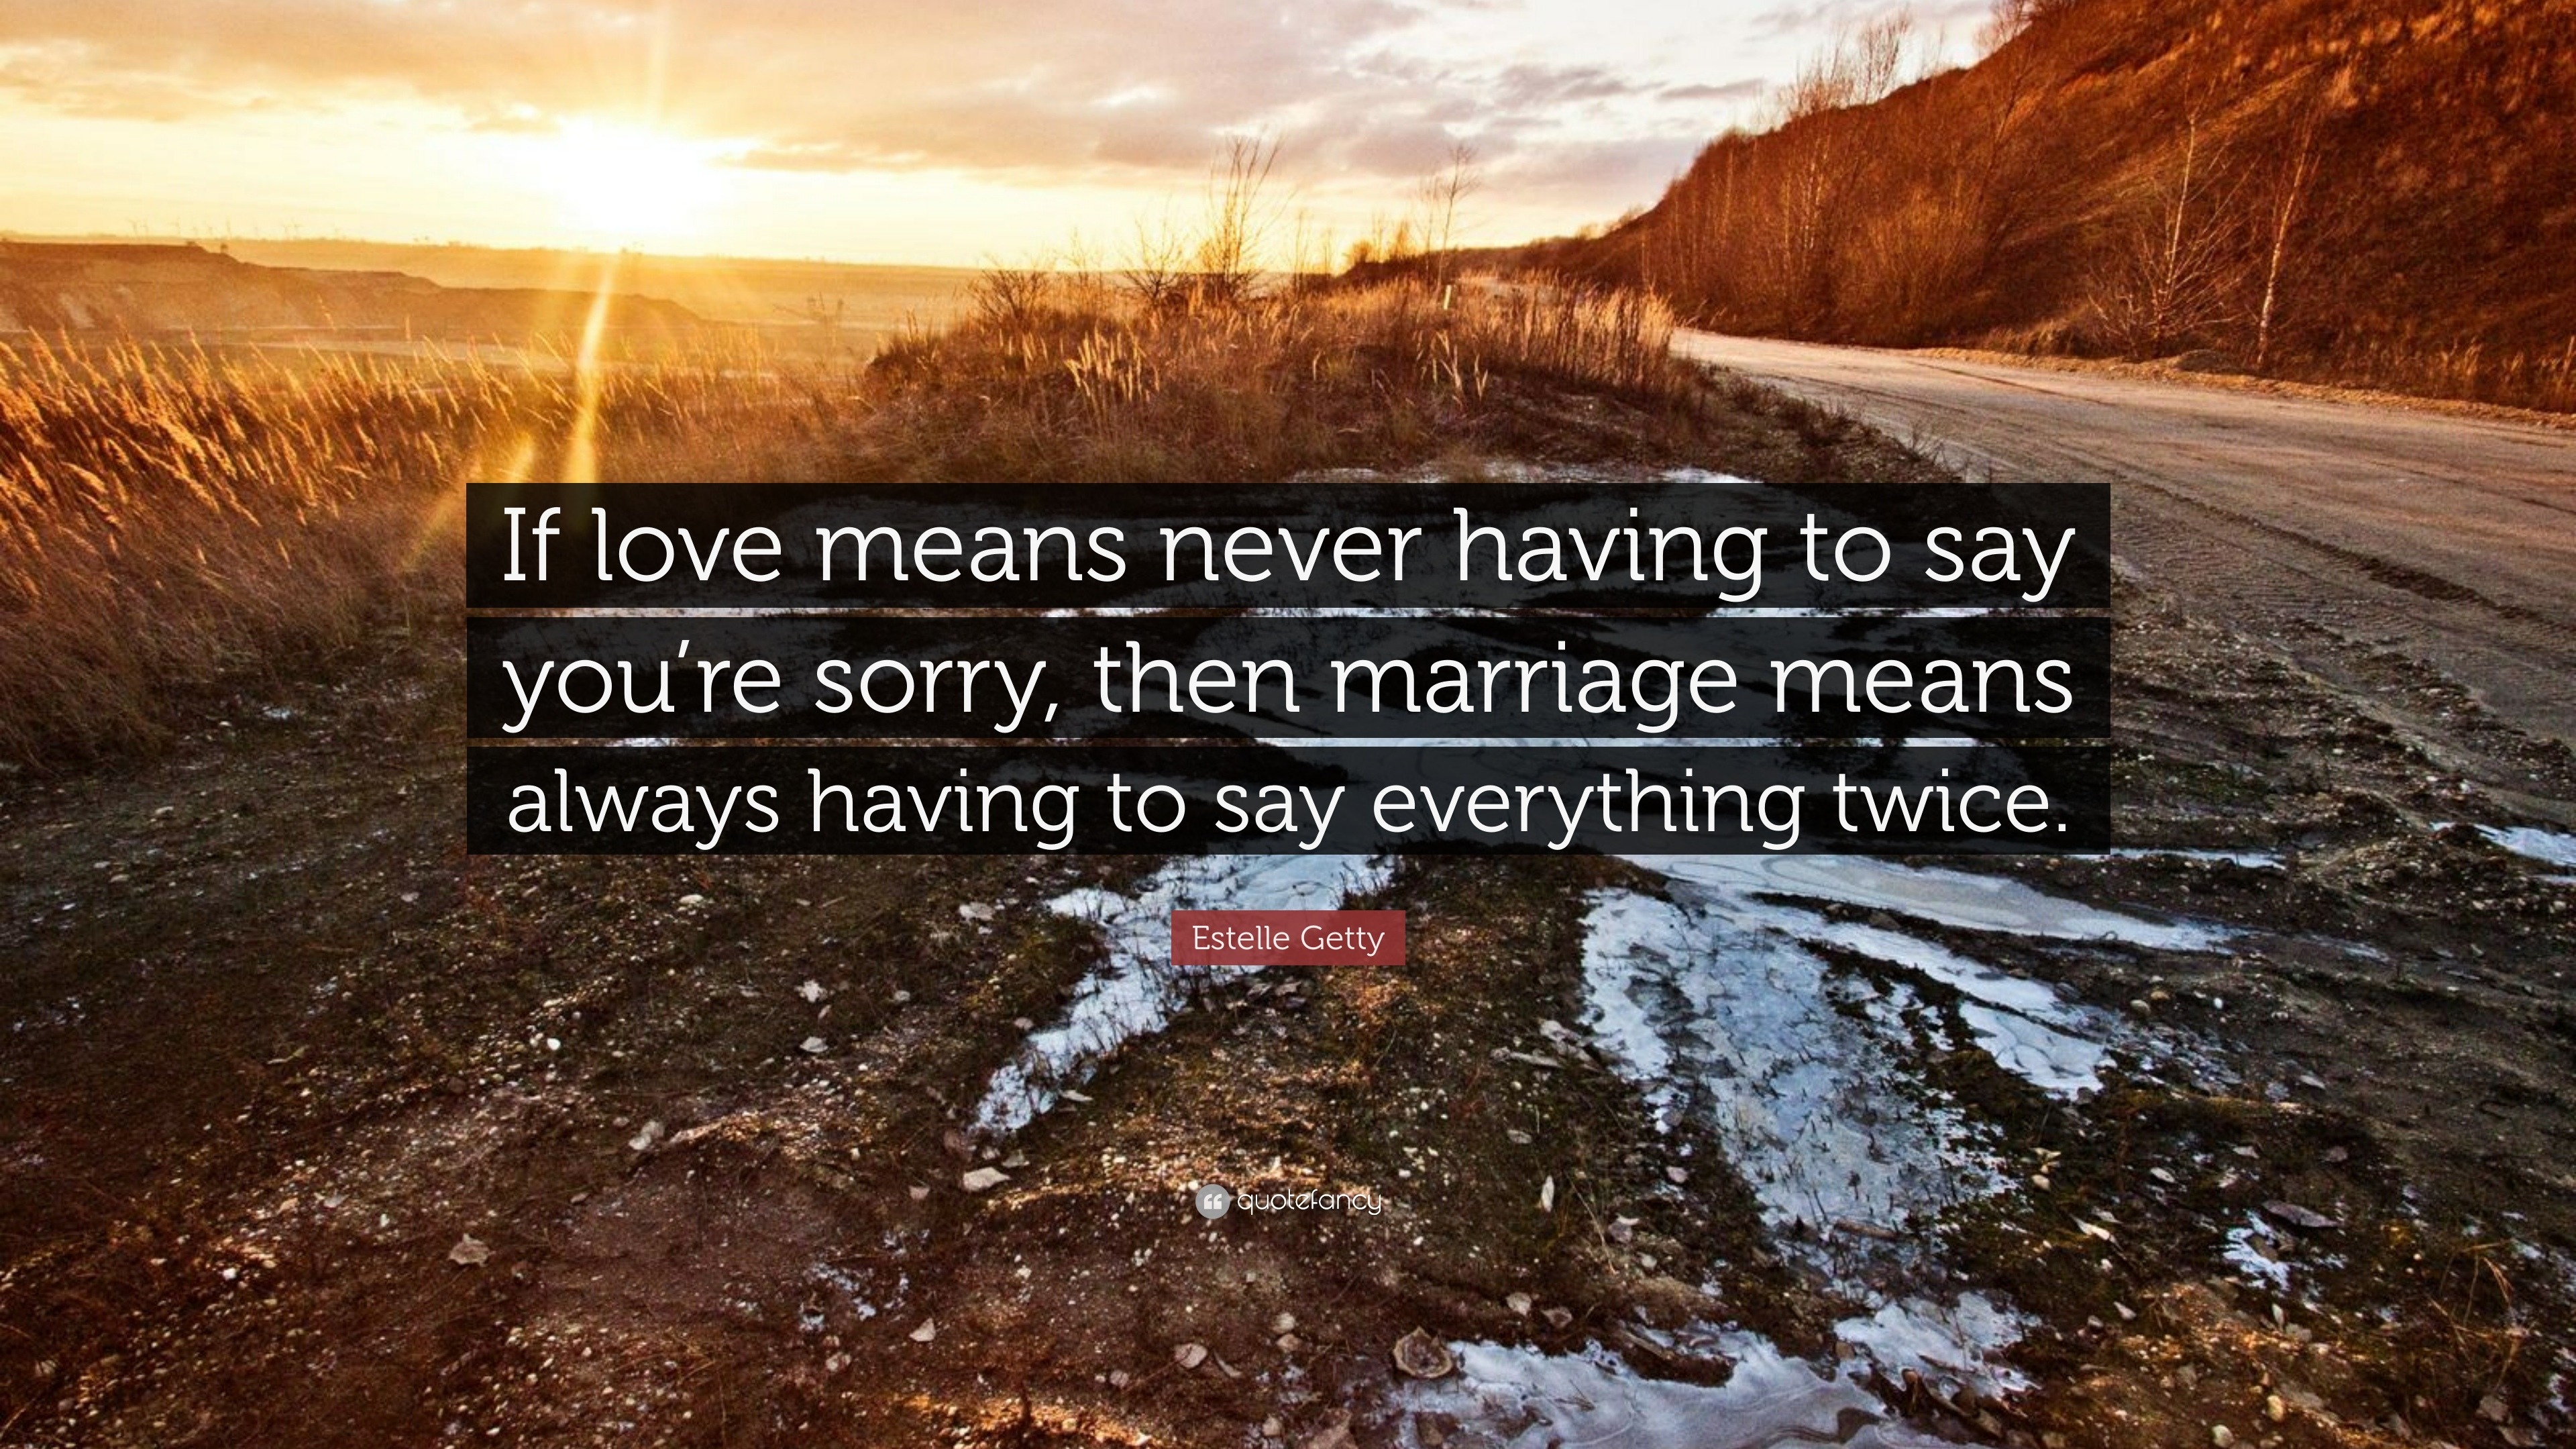 Estelle Getty Quote “If love means never having to say you re sorry